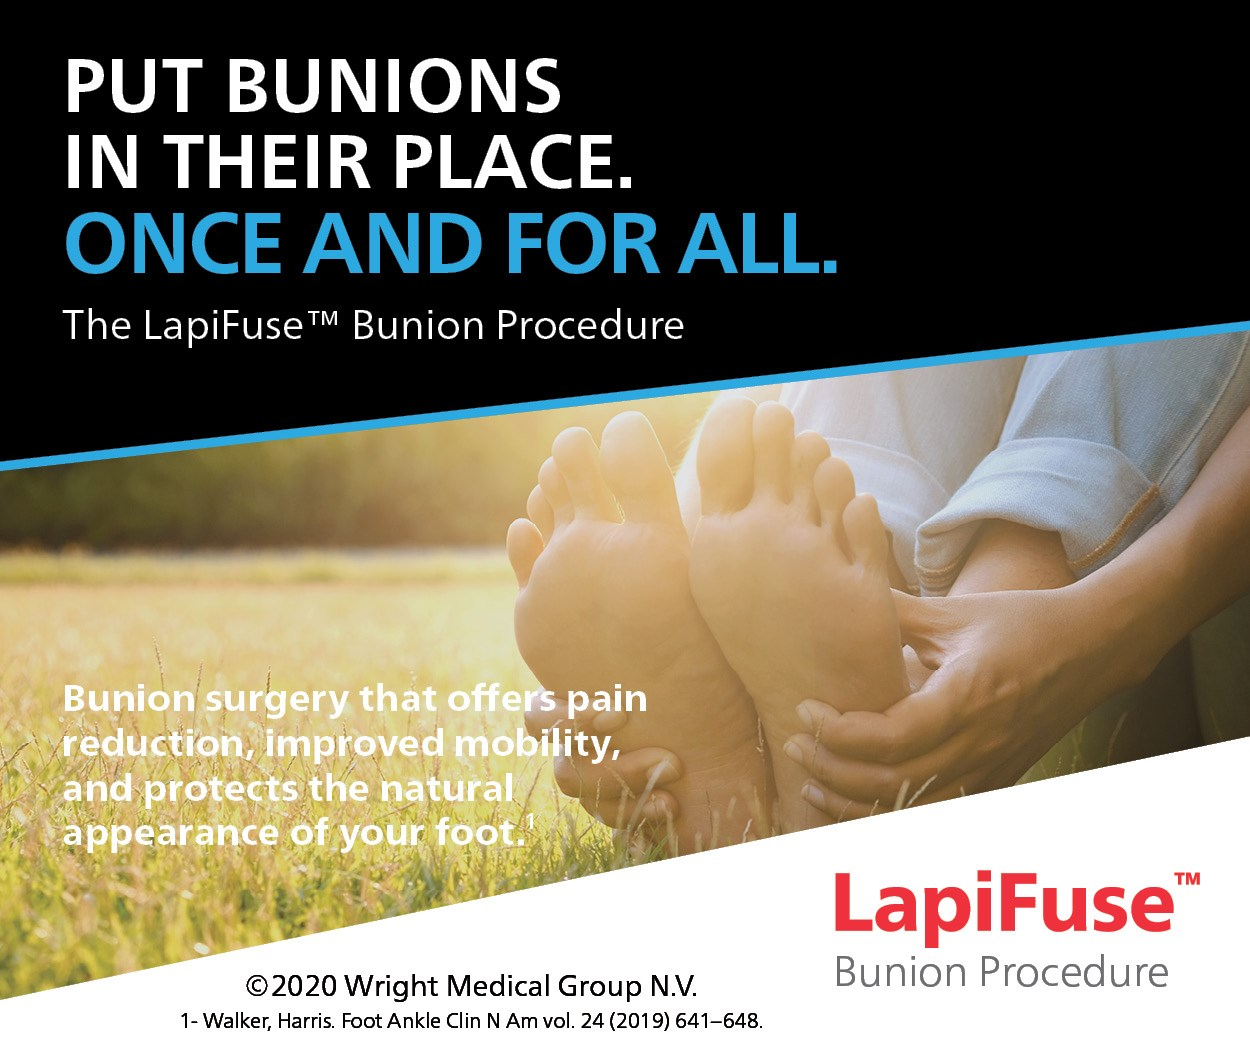 LapiFuse Bunion Procedure reduces pain and increased mobility